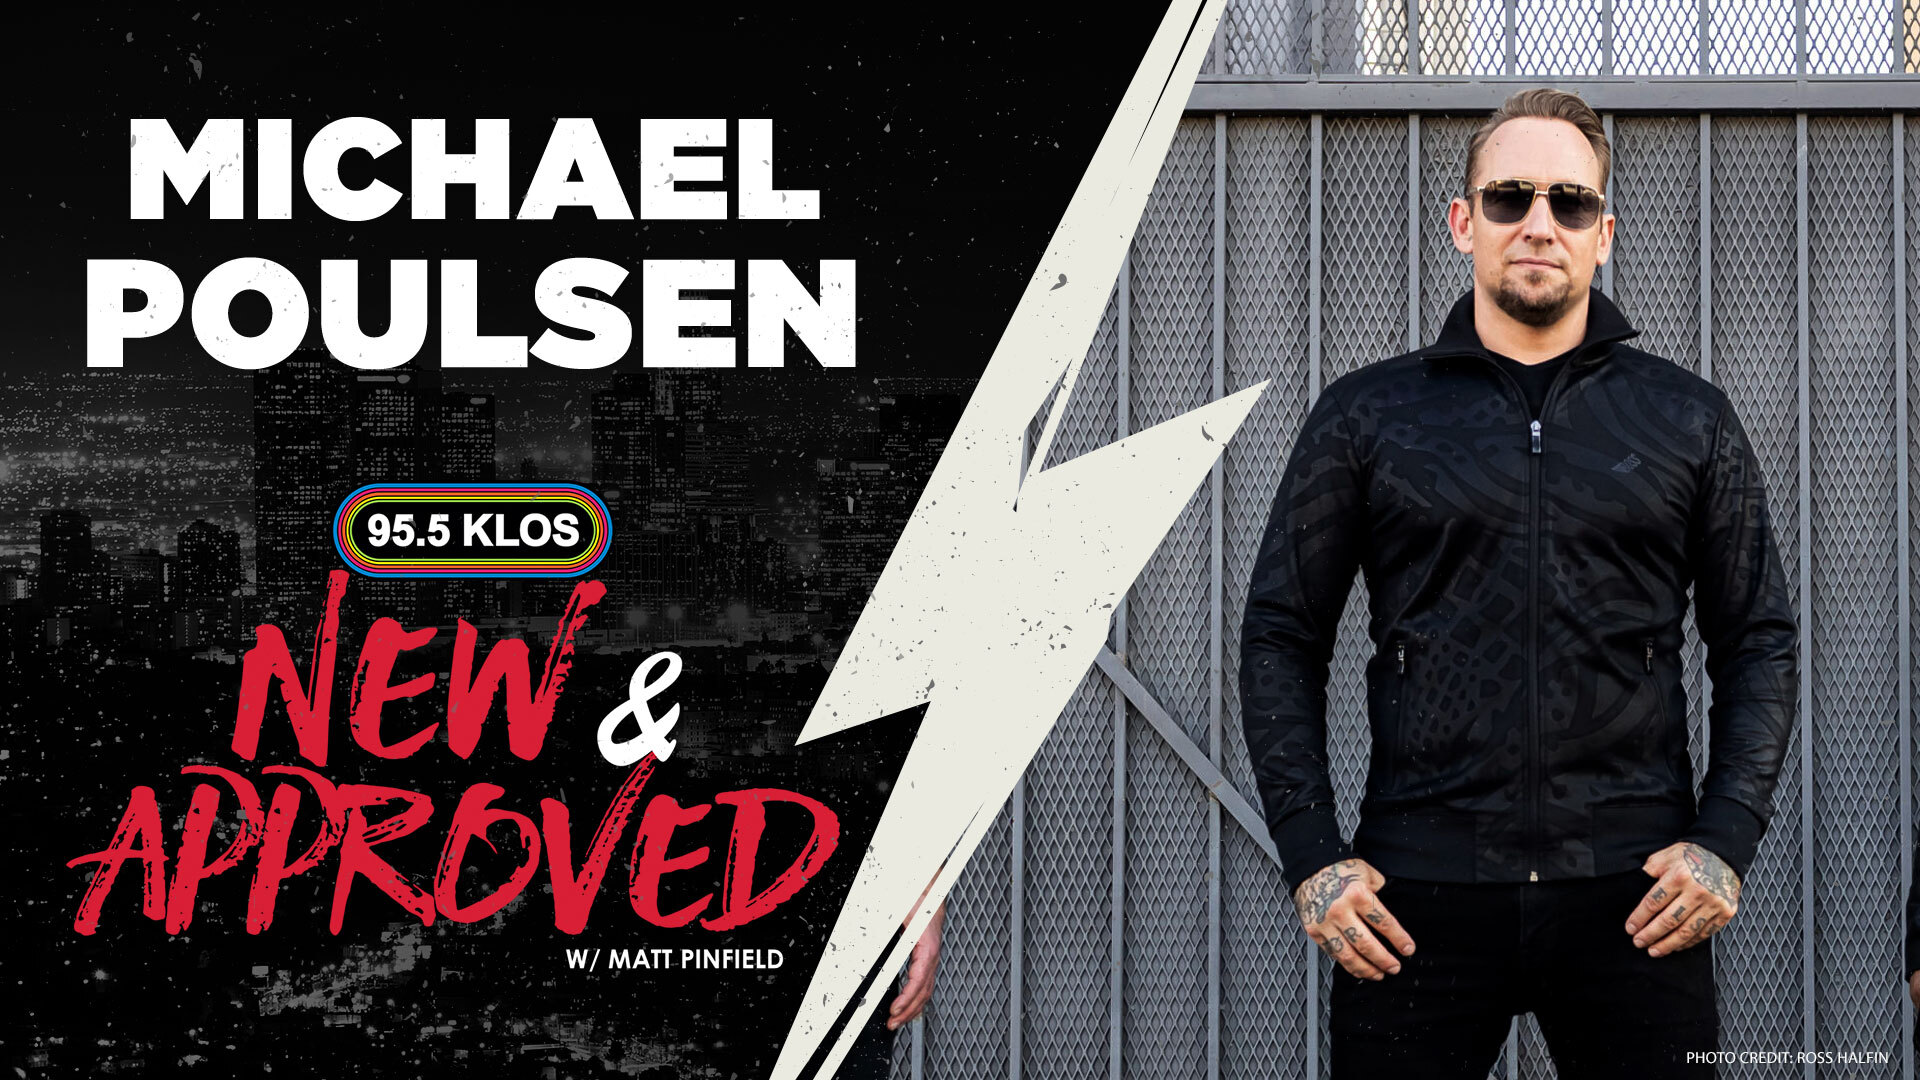 Volbeat’s Michael Poulsen Speaks With Matt Pinfield About The Newest Album And Current Tour